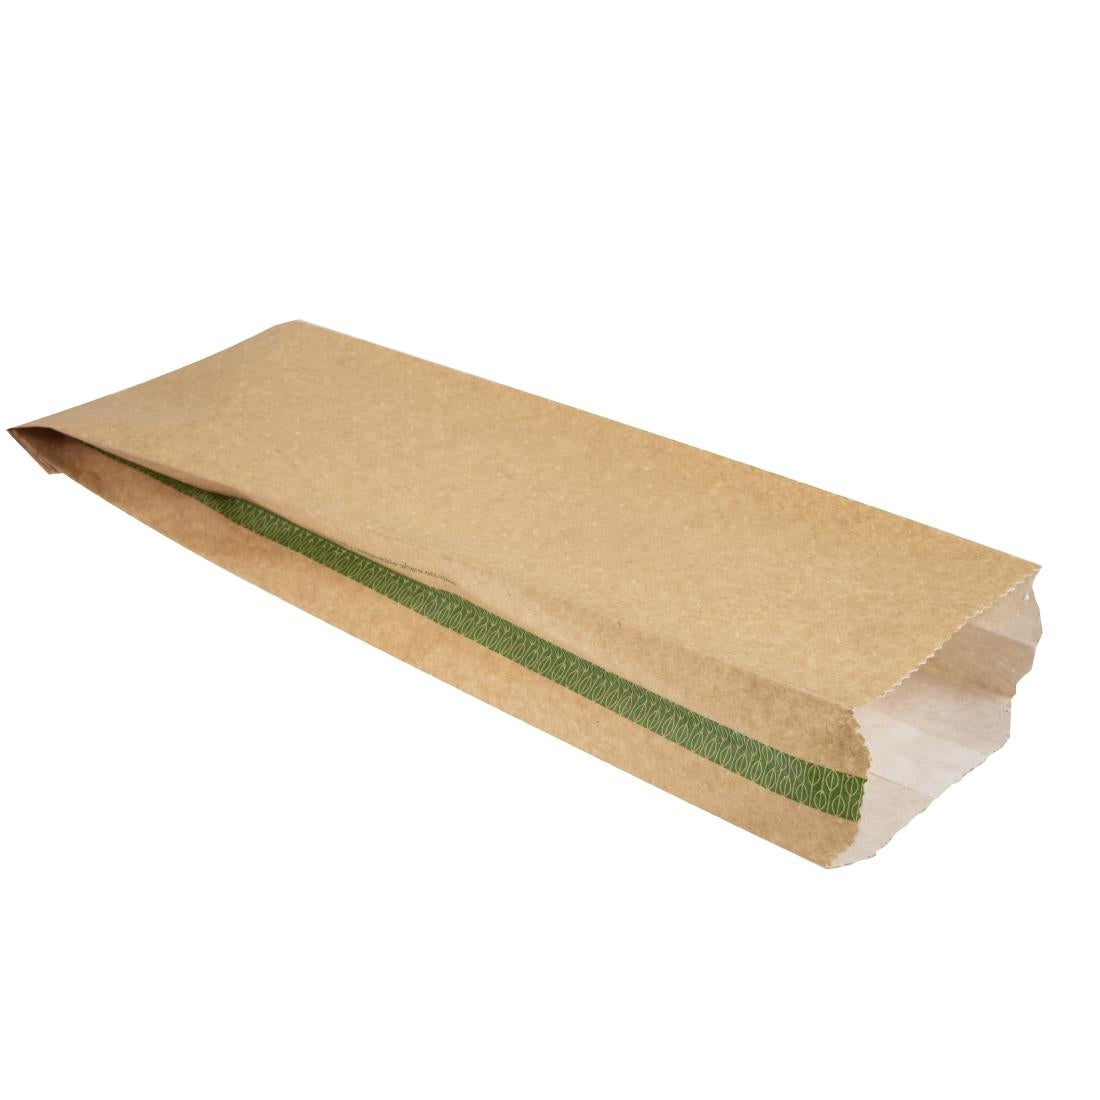 Vegware Compostable Therma Paper Hot Food Bags (Pack of 500)